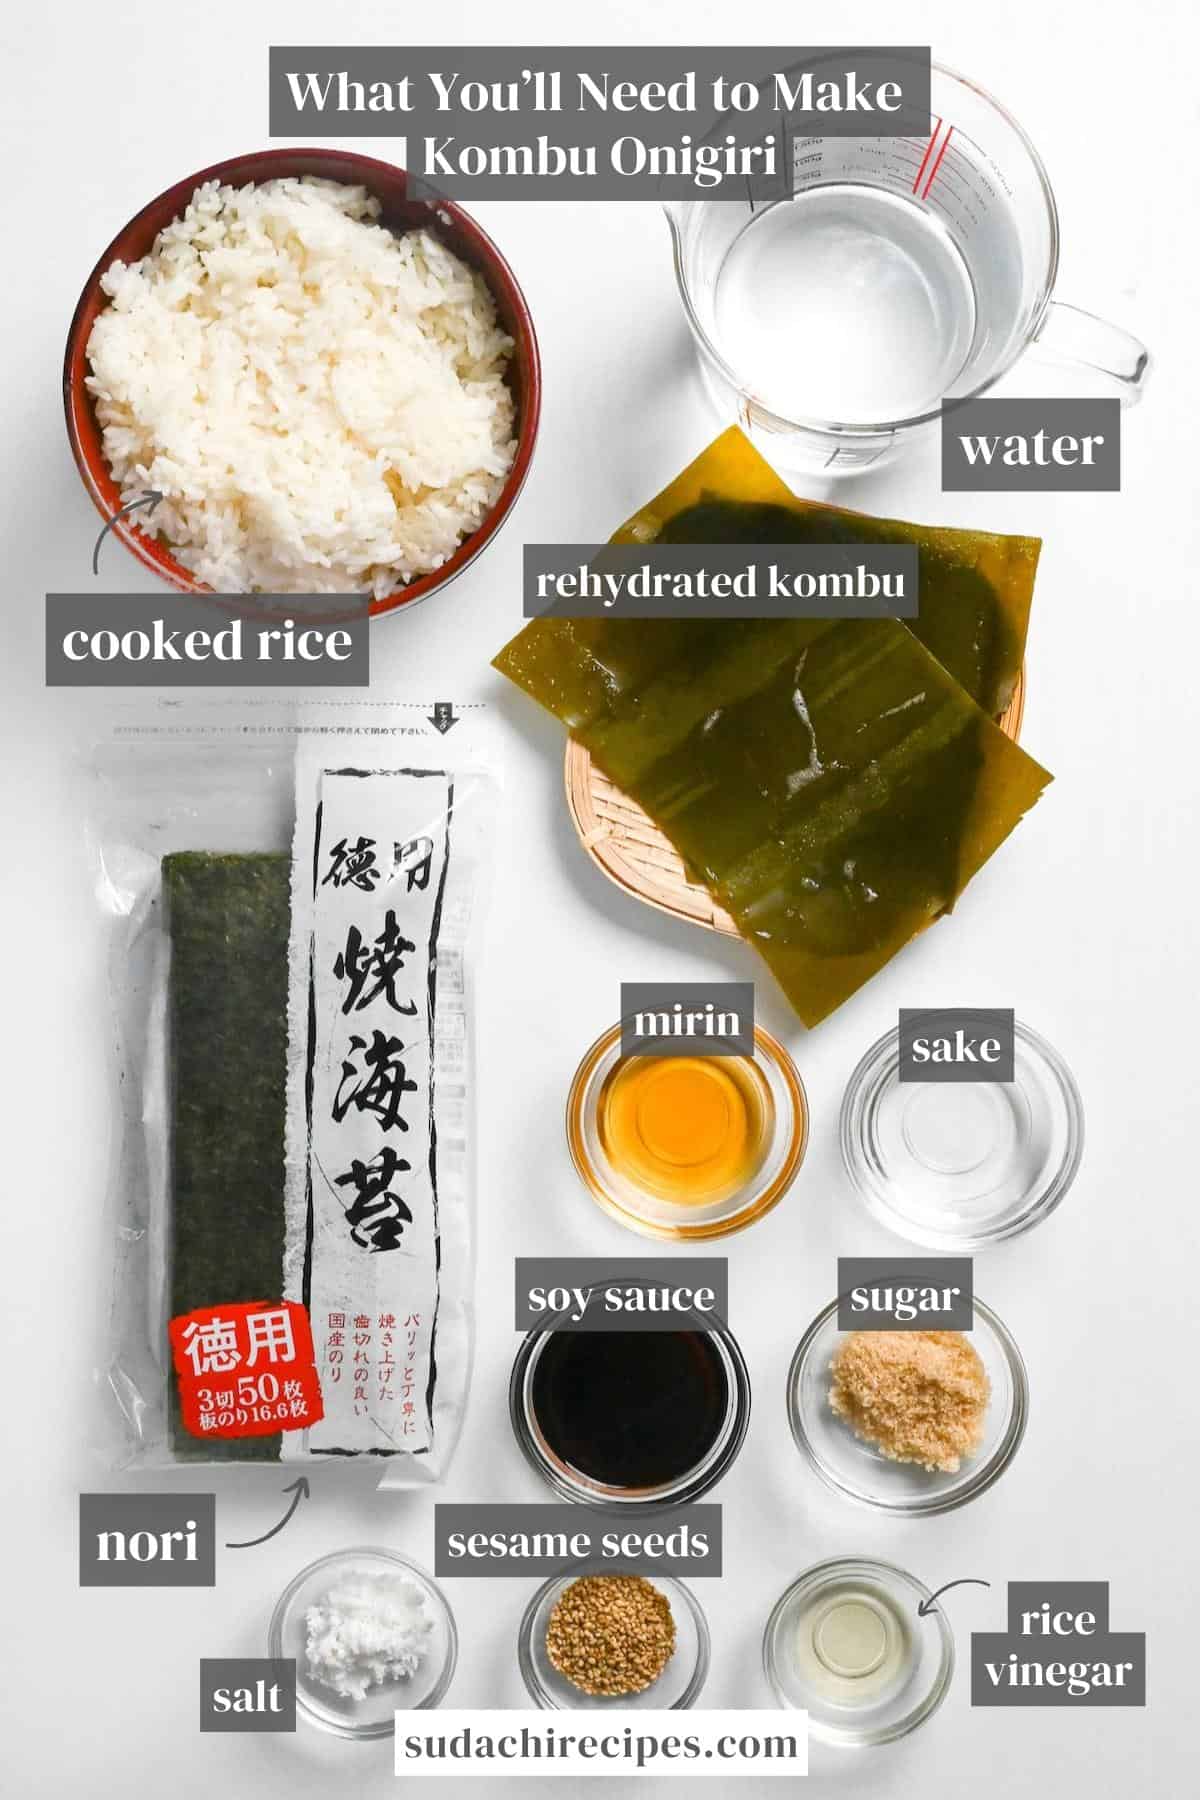 kombu onigiri rice ball ingredients on a white background with labels